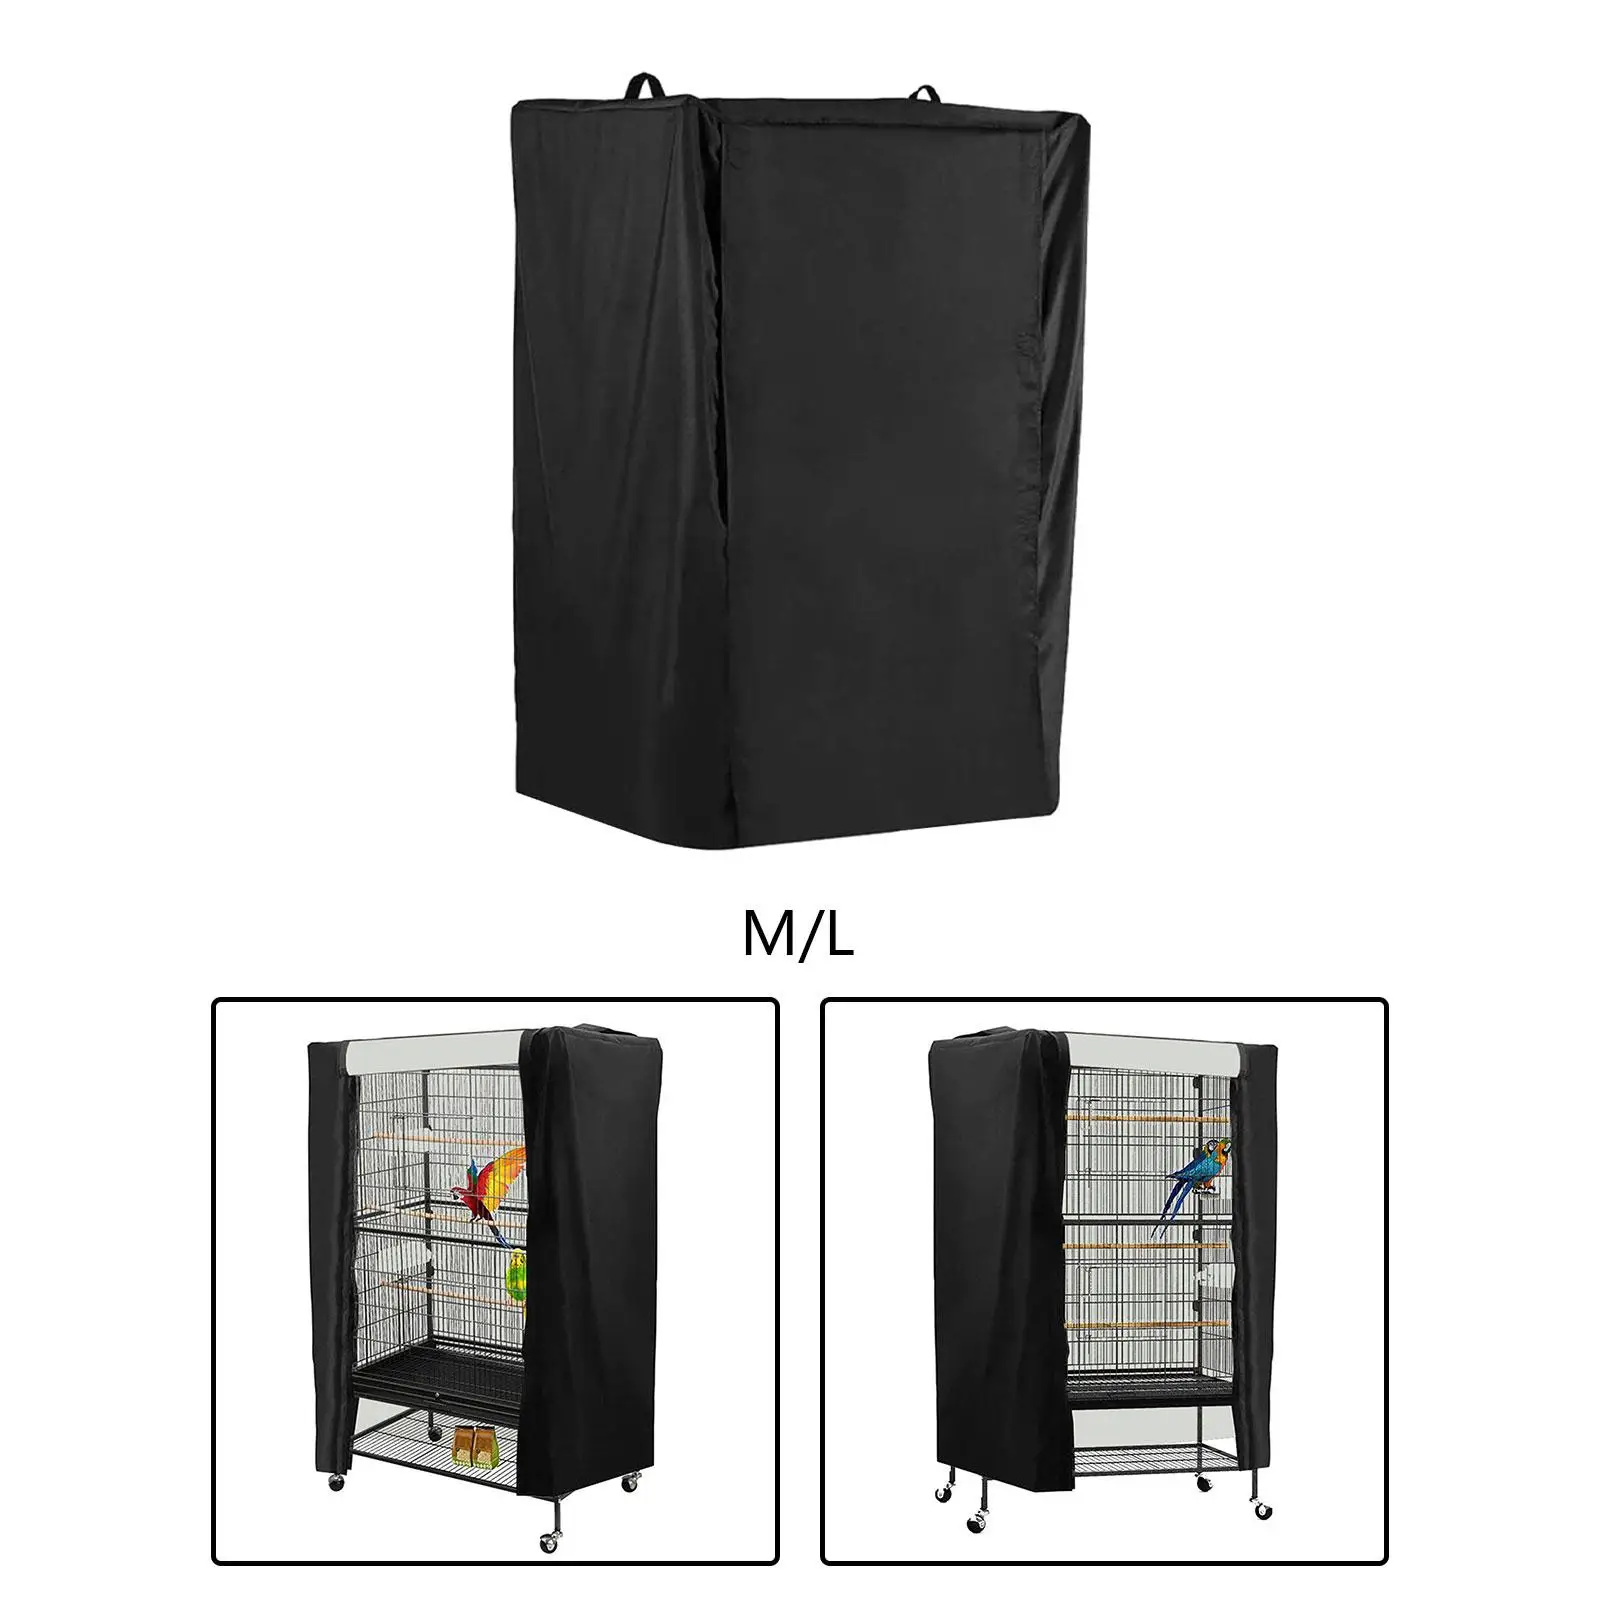 Bird Cage Cover Sunproof Breathable Good Night Waterproof Shading Cloth Dustproof for Macaw Parrot Pet Lovebirds Square Cages